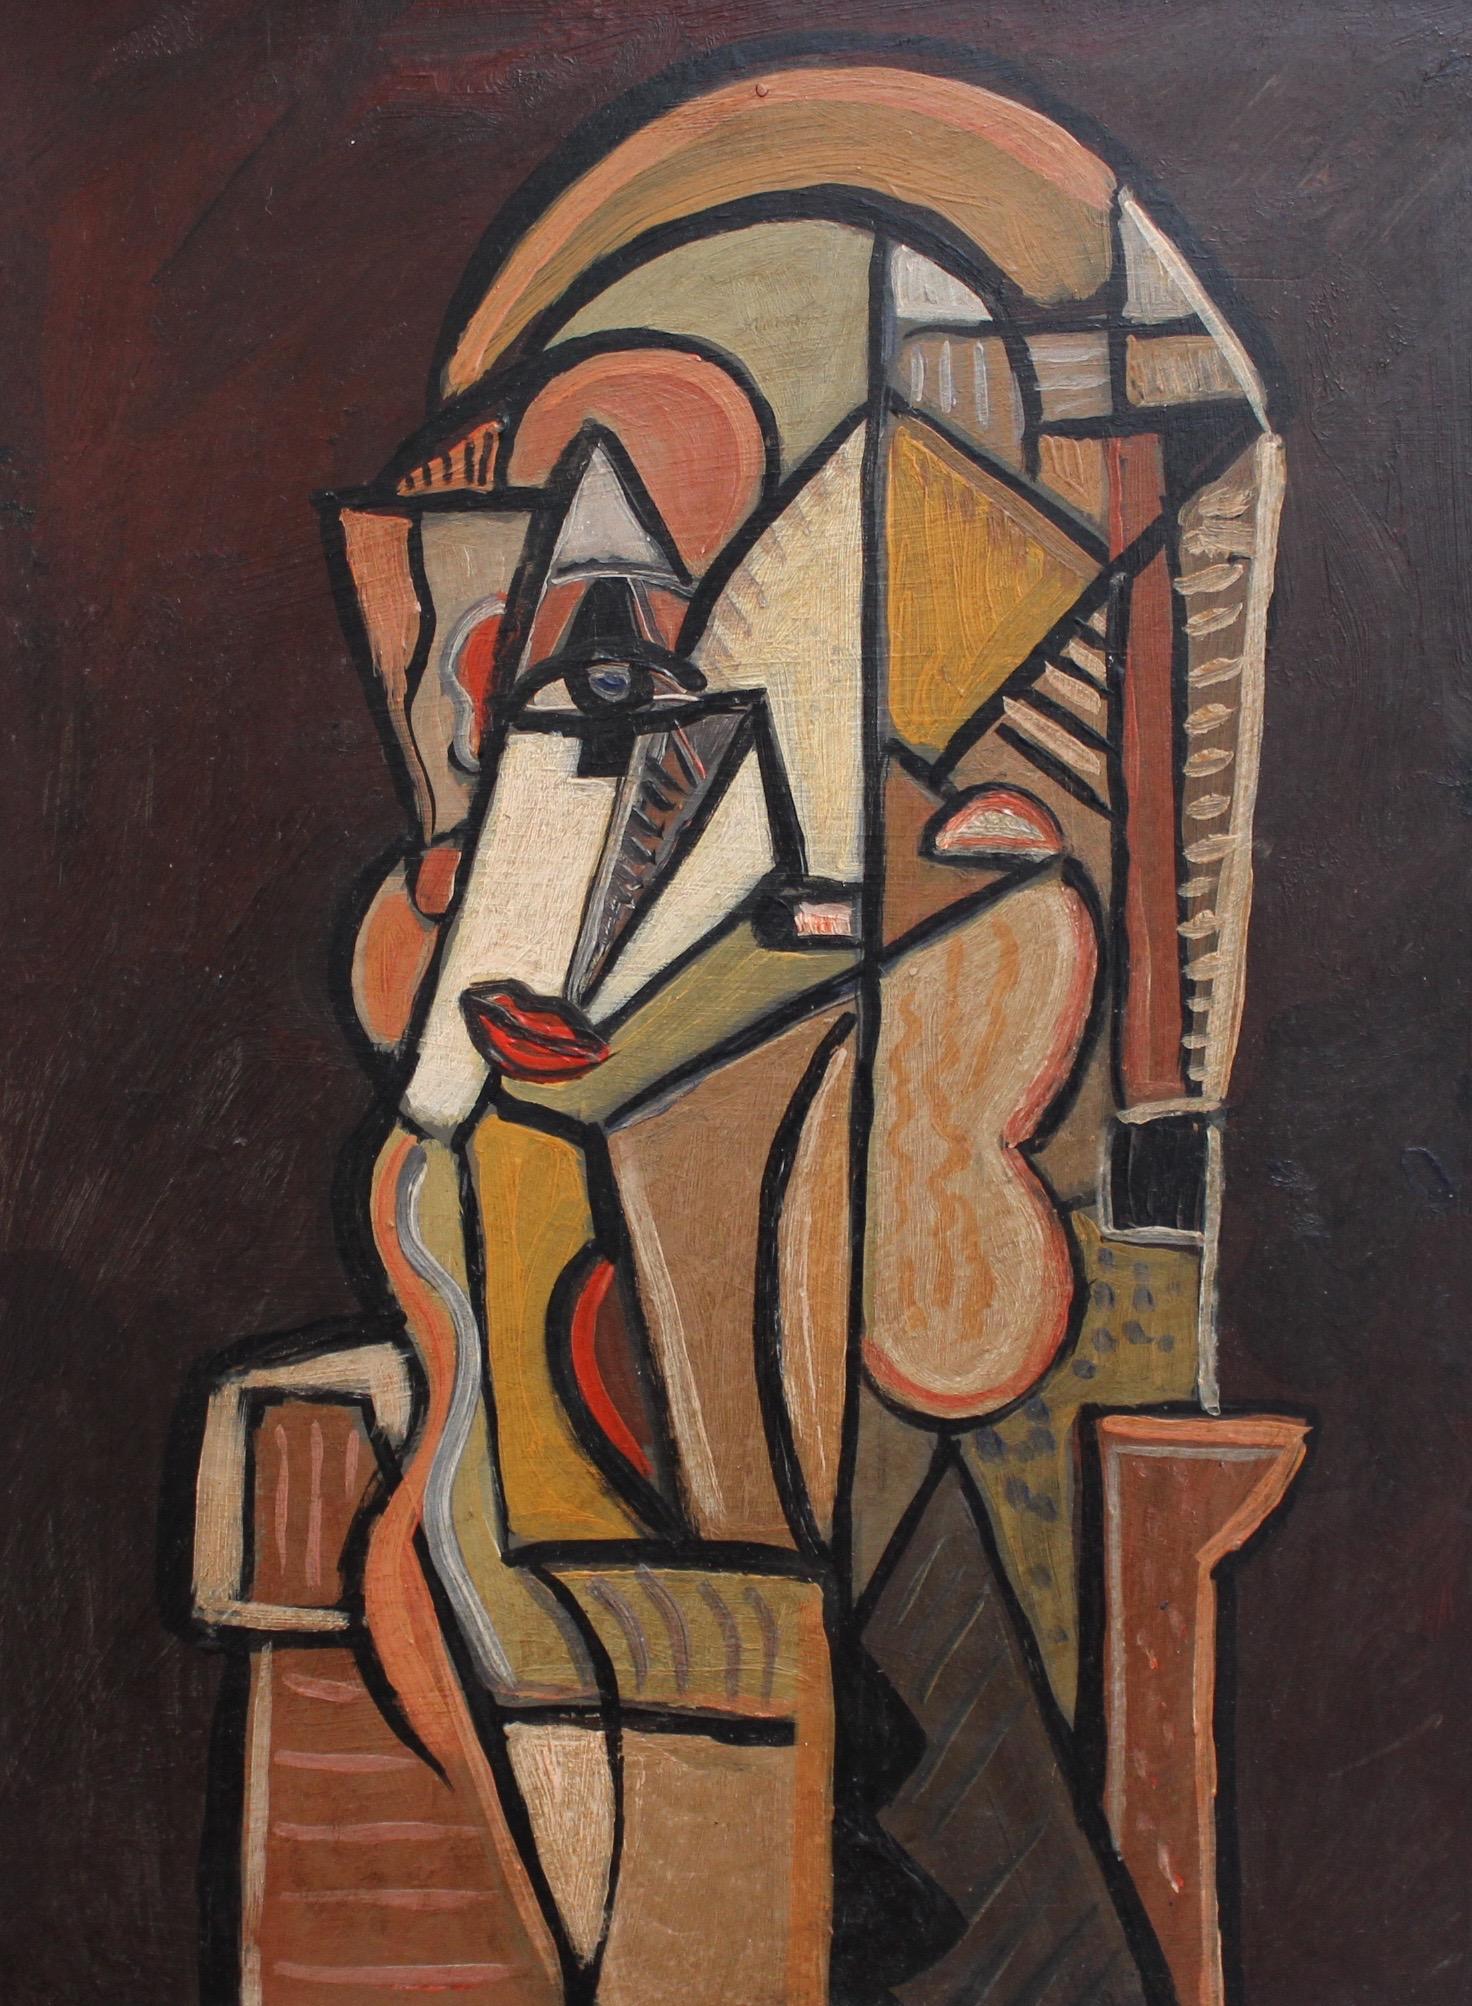 Unknown Abstract Painting - 'The Opera Singer', Mid-Century Modern Cubist Oil Portrait Painting, Berlin